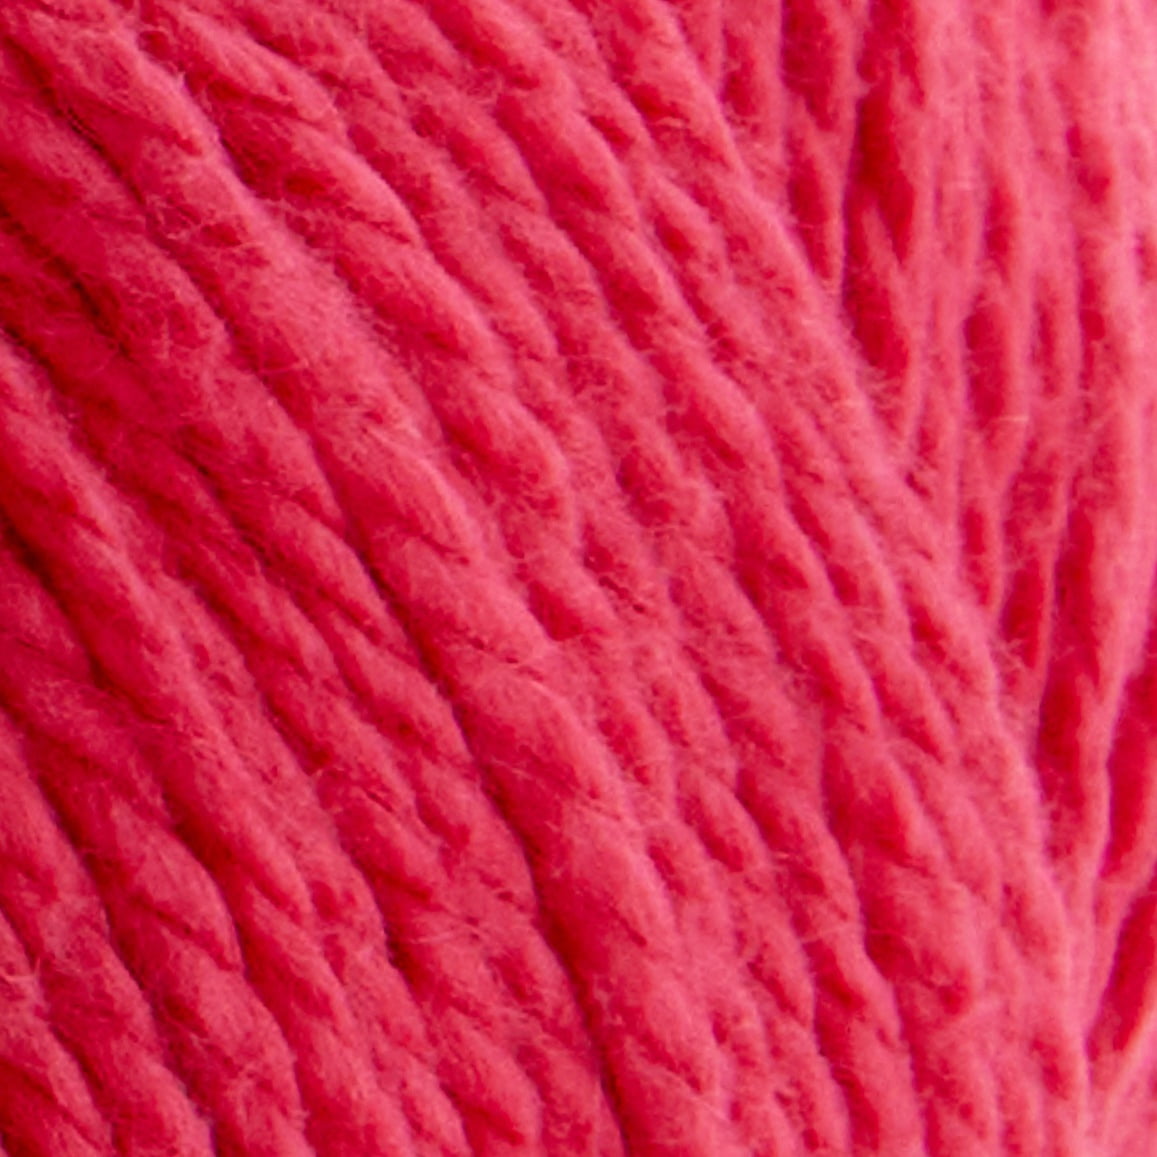  Premier Yarns Cotton Sprout DK, Natural Cotton Yarn